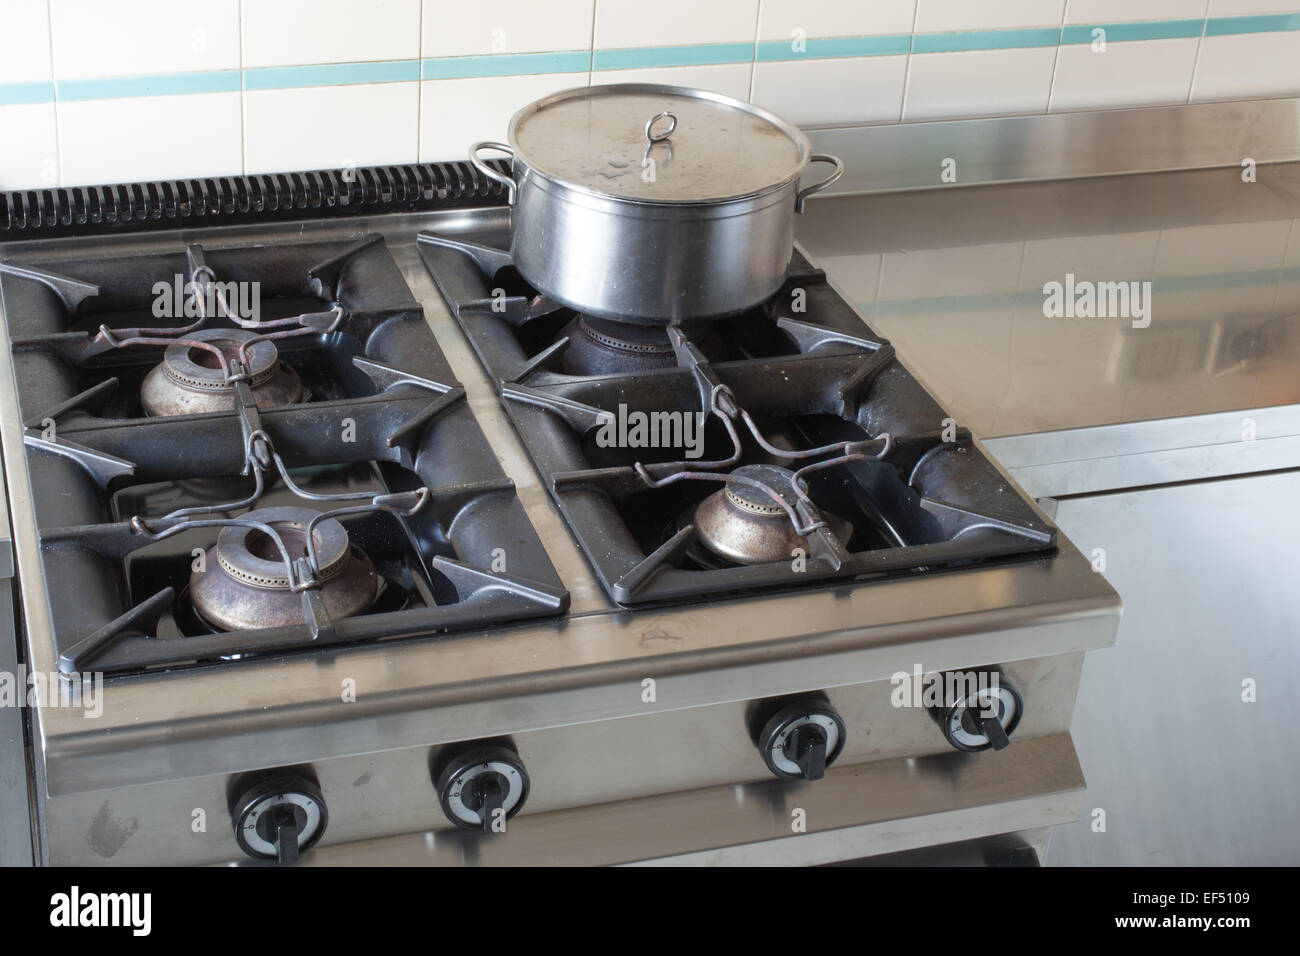 https://c8.alamy.com/comp/EF5109/steel-large-pot-over-the-stove-of-kitchen-in-stainless-steel-EF5109.jpg